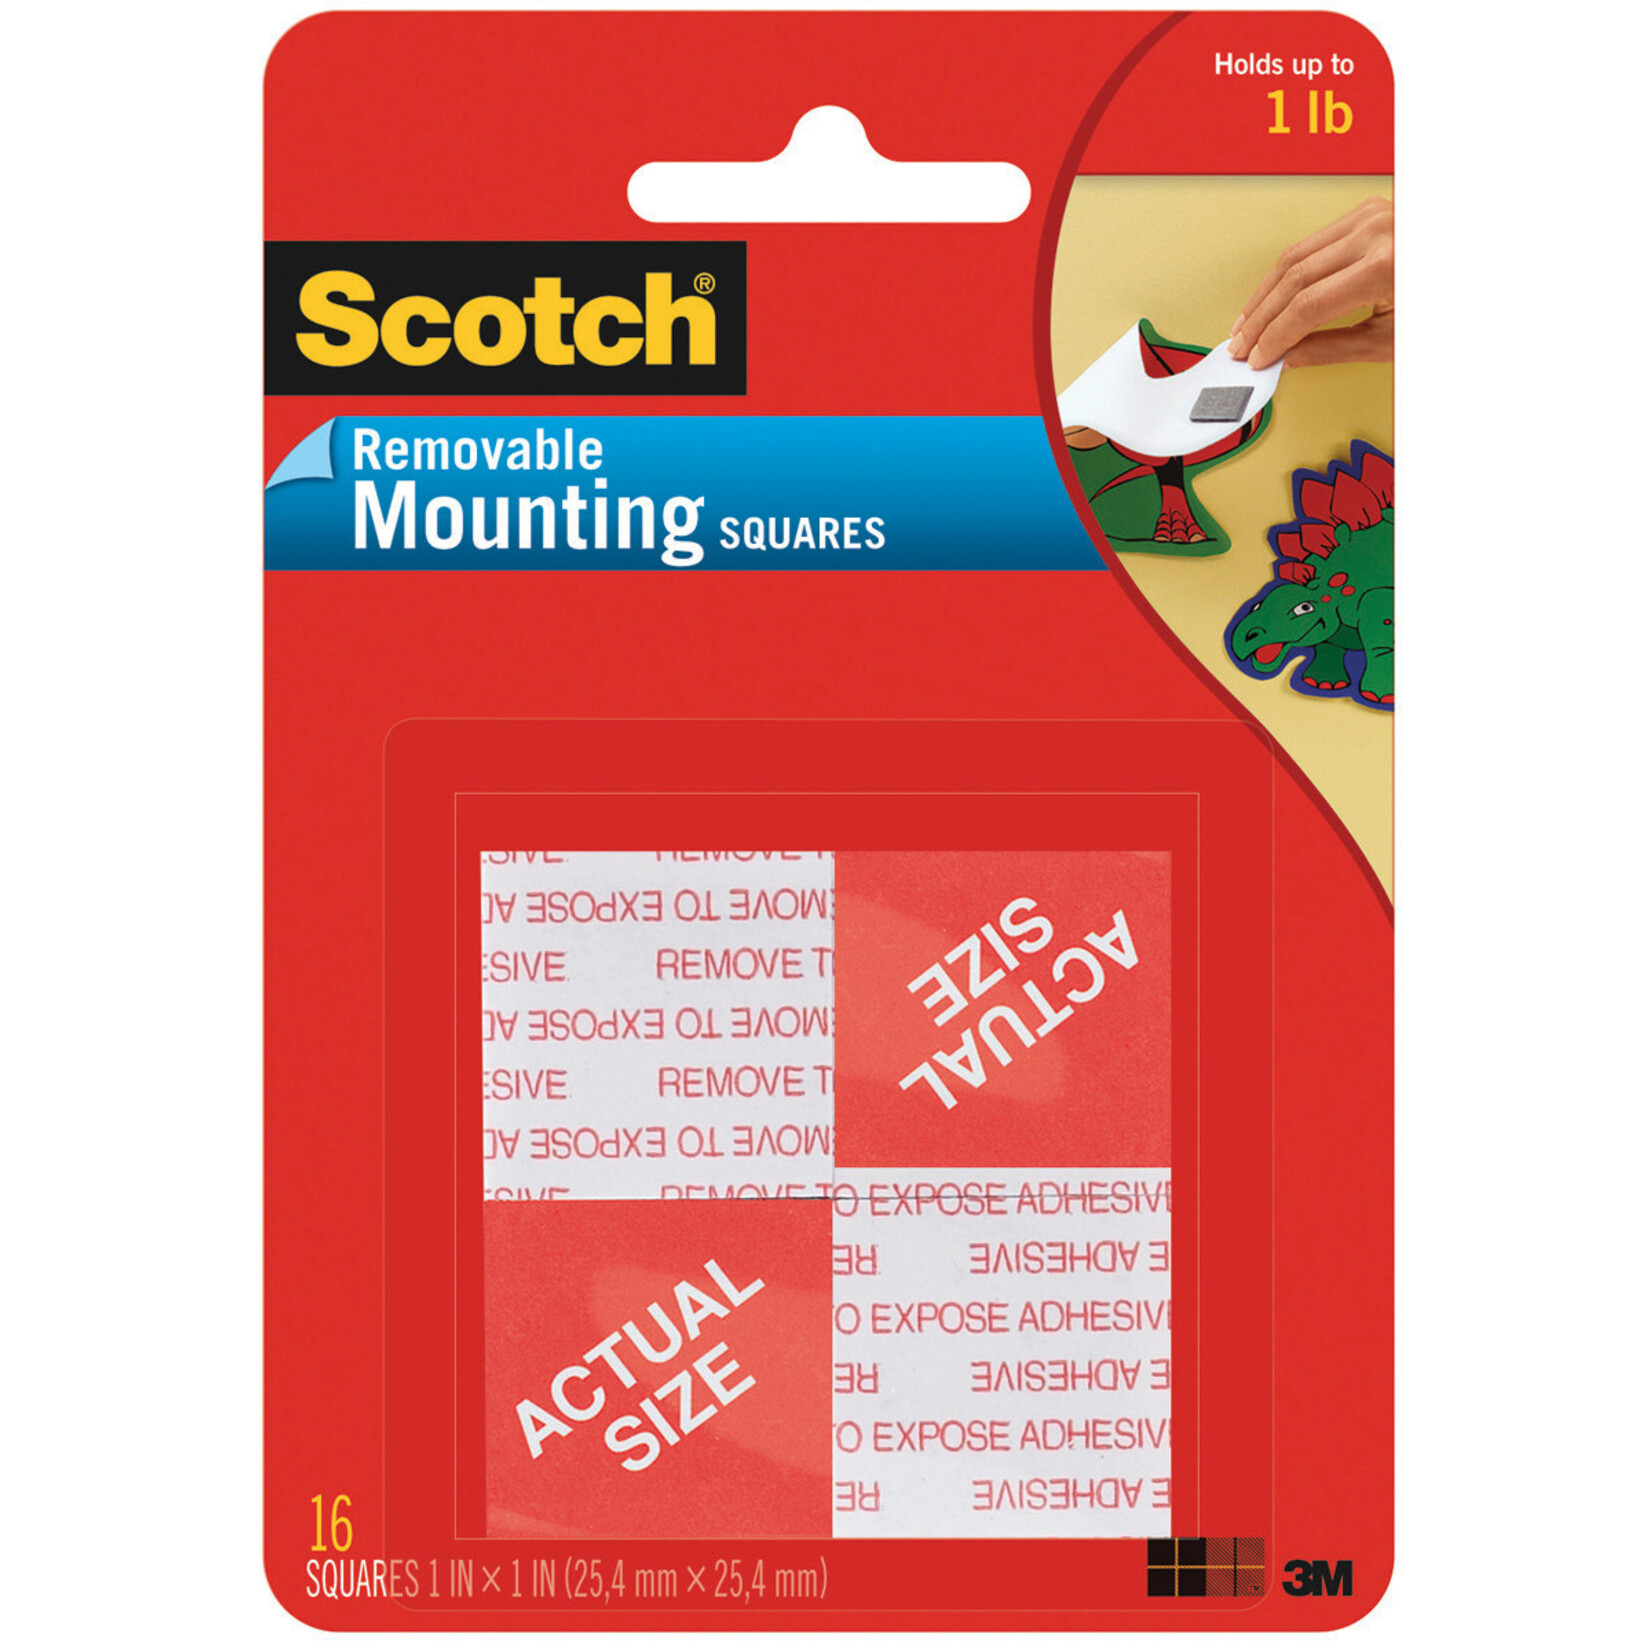 Scotch 3m Scotch Removable Mounting Squares, 1'' Squares 16 Pack